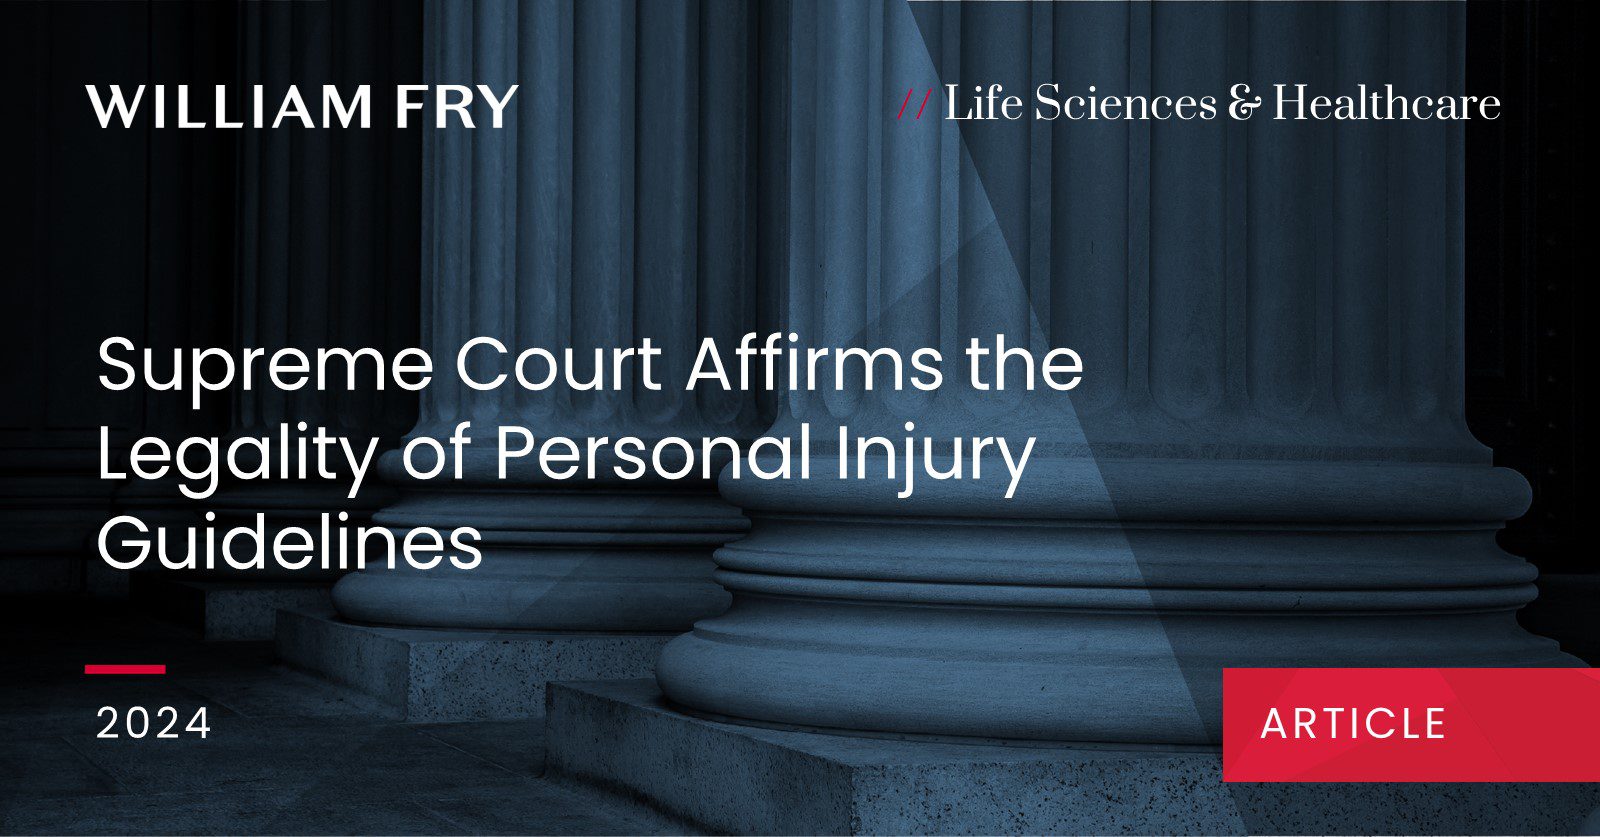 Supreme Court Affirms the Legality of Personal Injury Guidelines